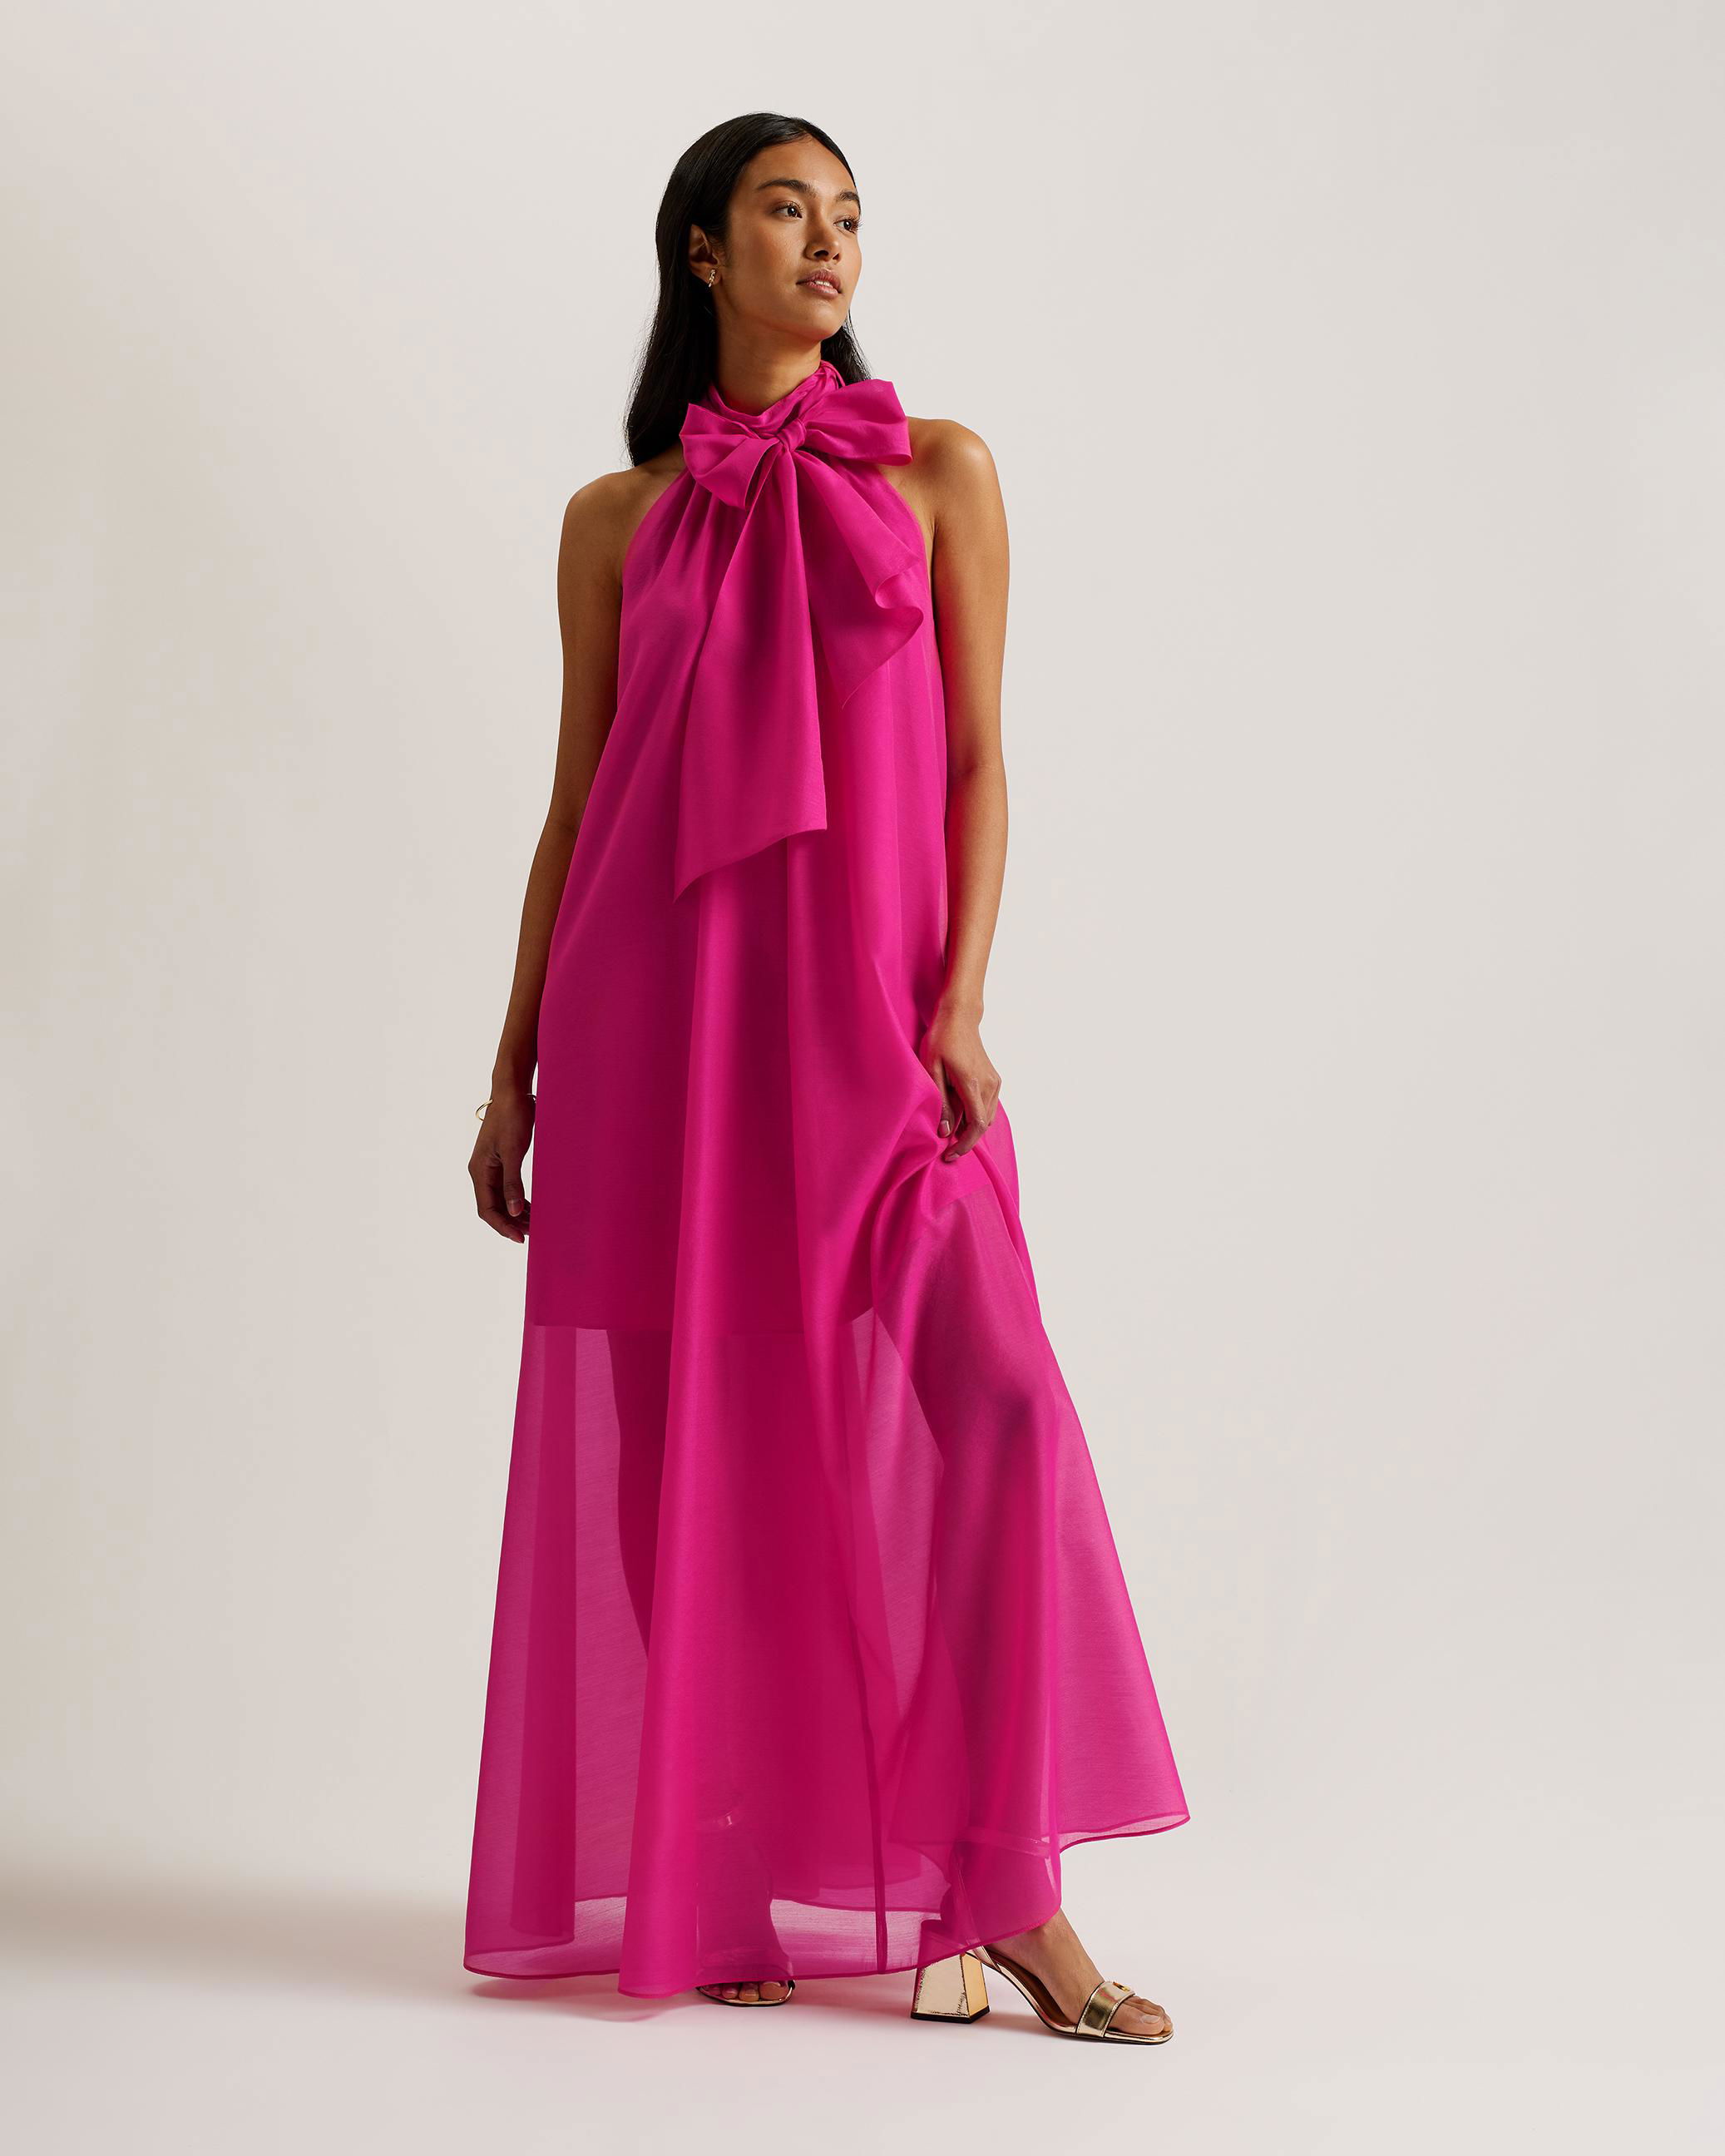 Organza Maxi Dress With Tie Neck - ARIKAA - Bright Pink by TED BAKER